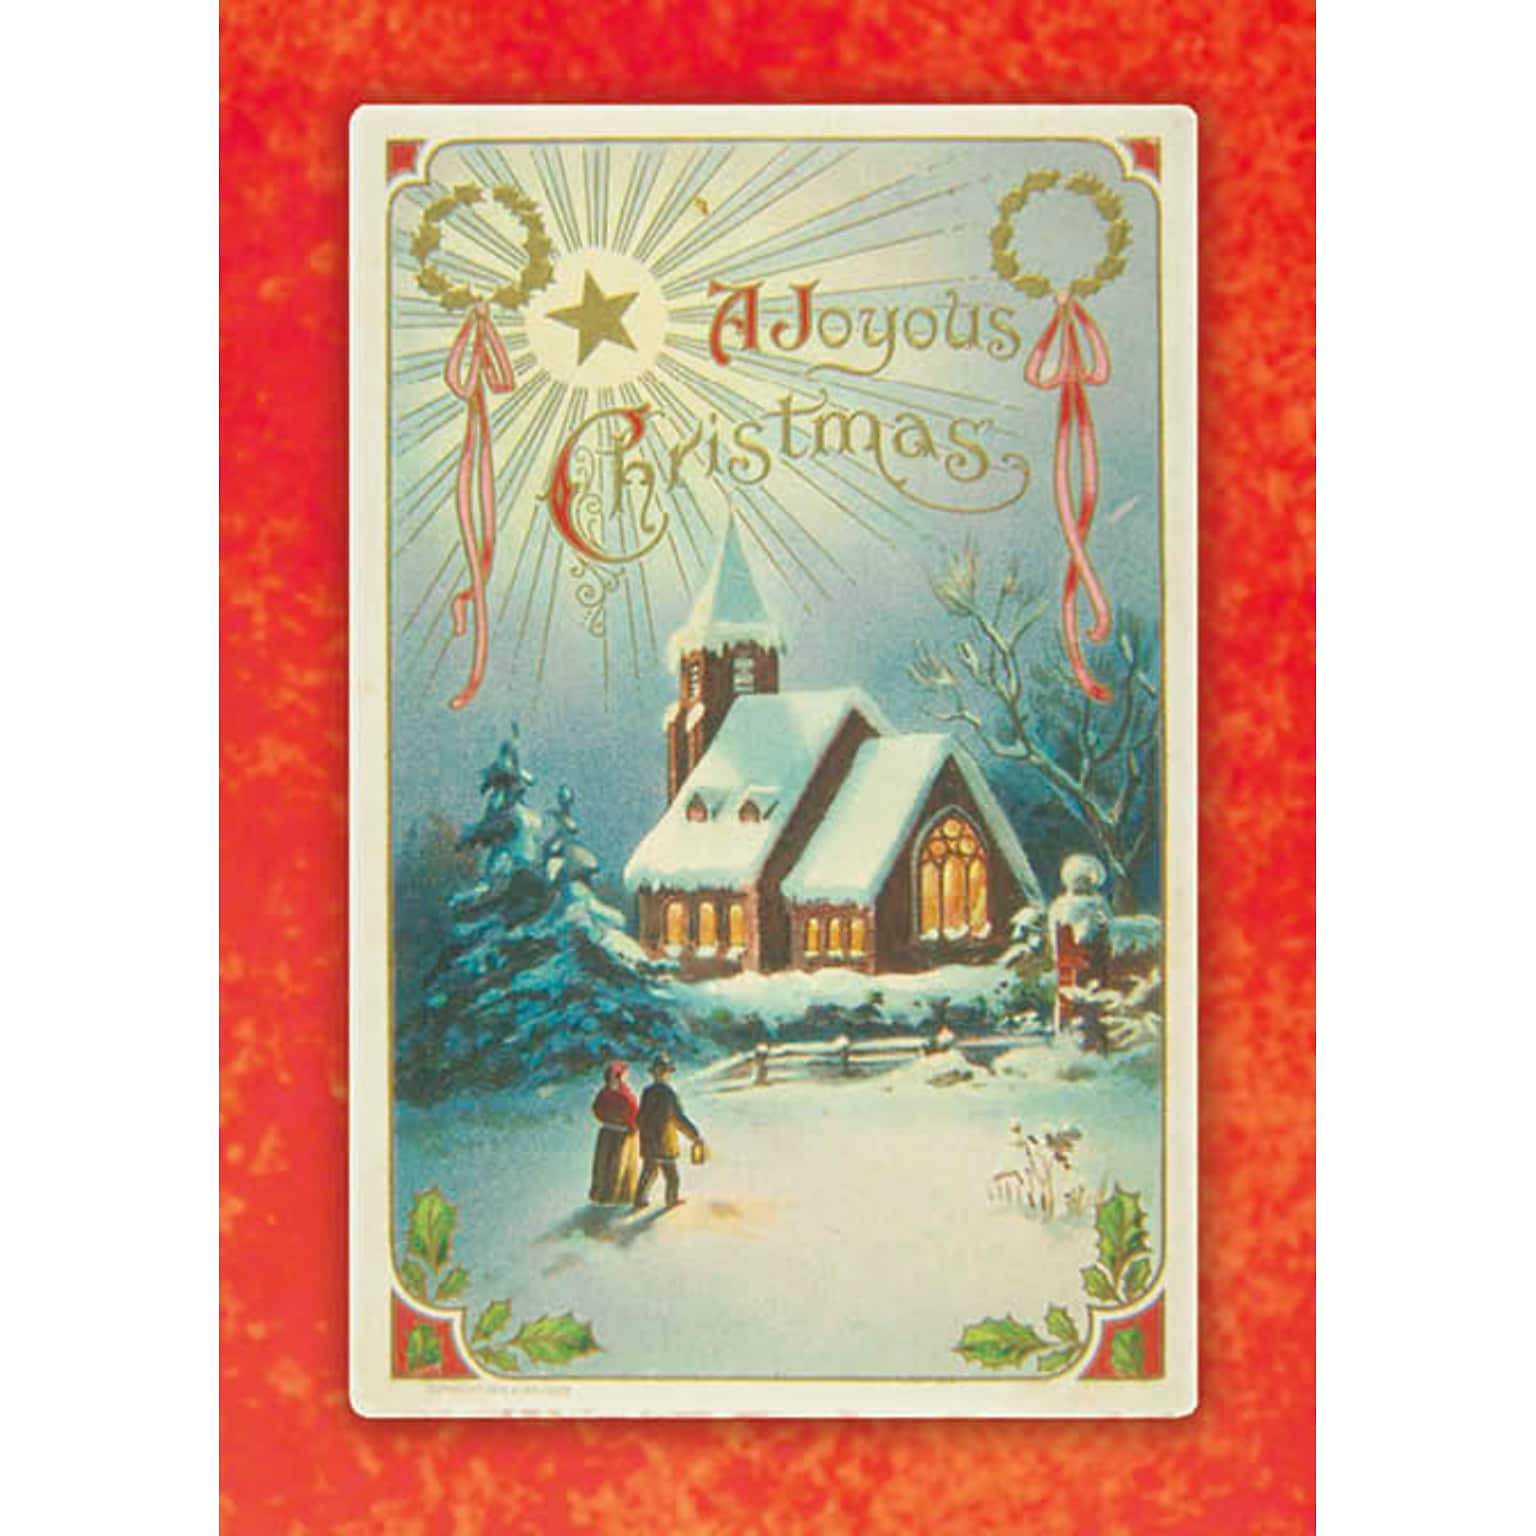 Vintage Greetings A Joyous Christmas Holiday Greeting Cards, With A7 Envelopes, 7 x 5, 25 Cards per Set